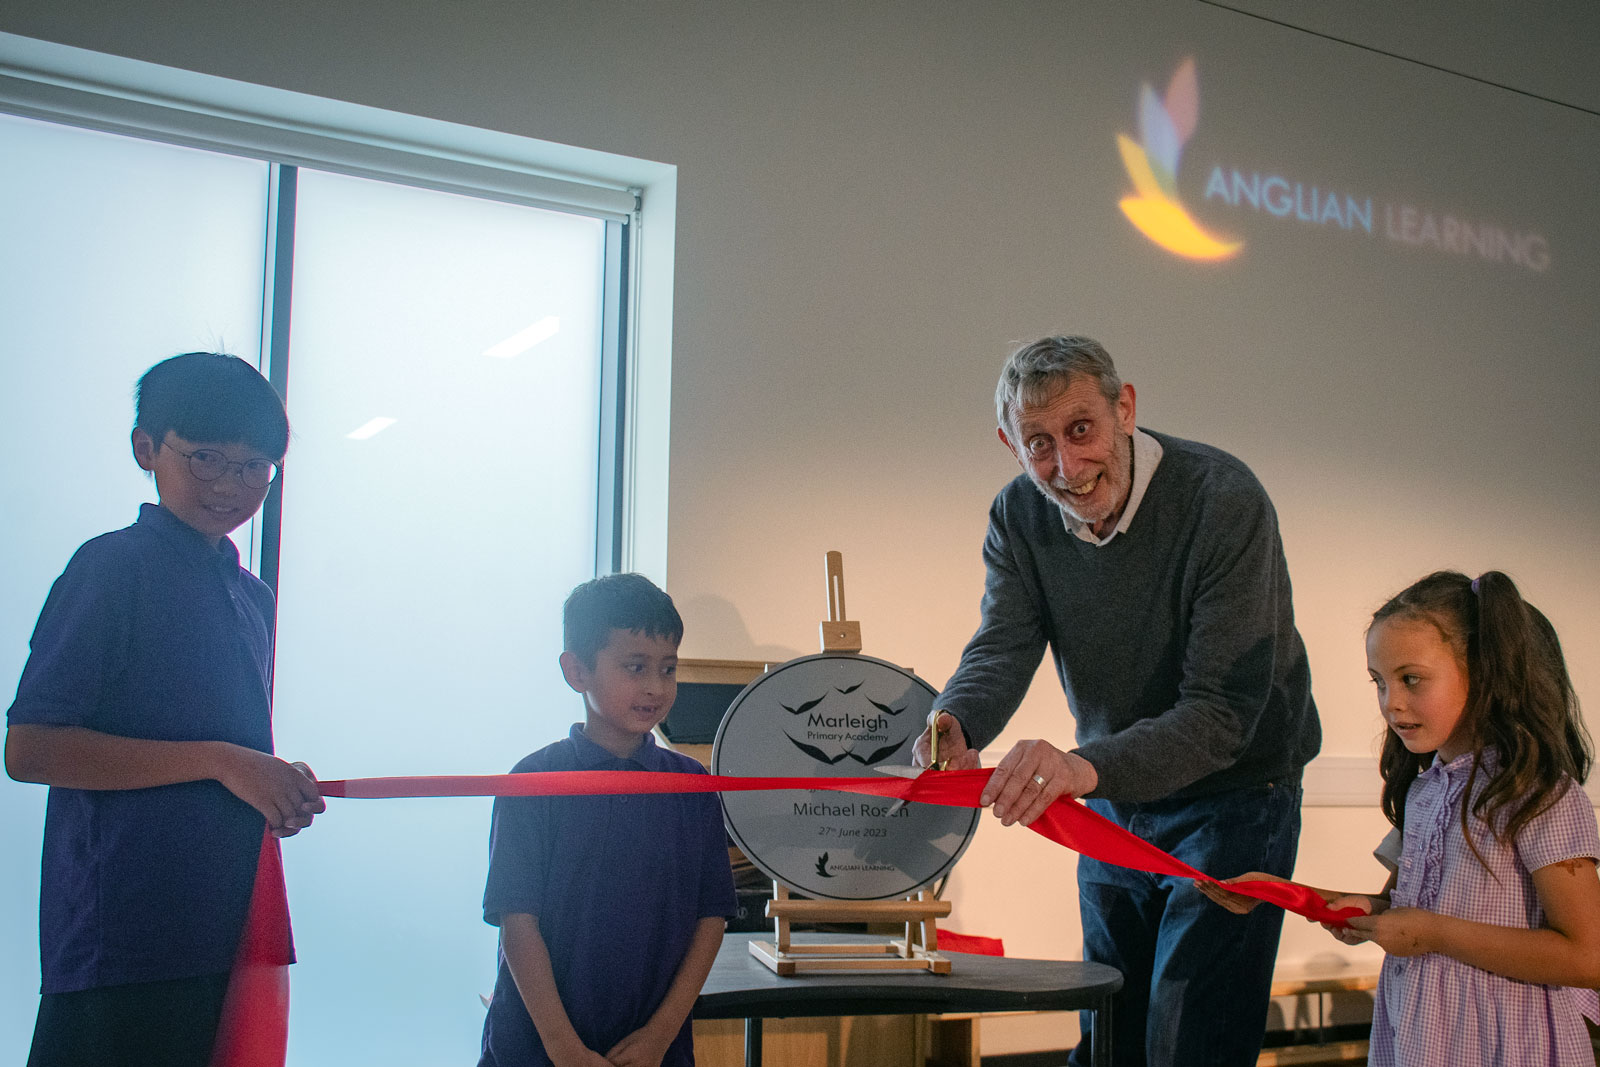 Michael Rosen helps Marleigh Primary Academy celebrate its sense of place and first academic year